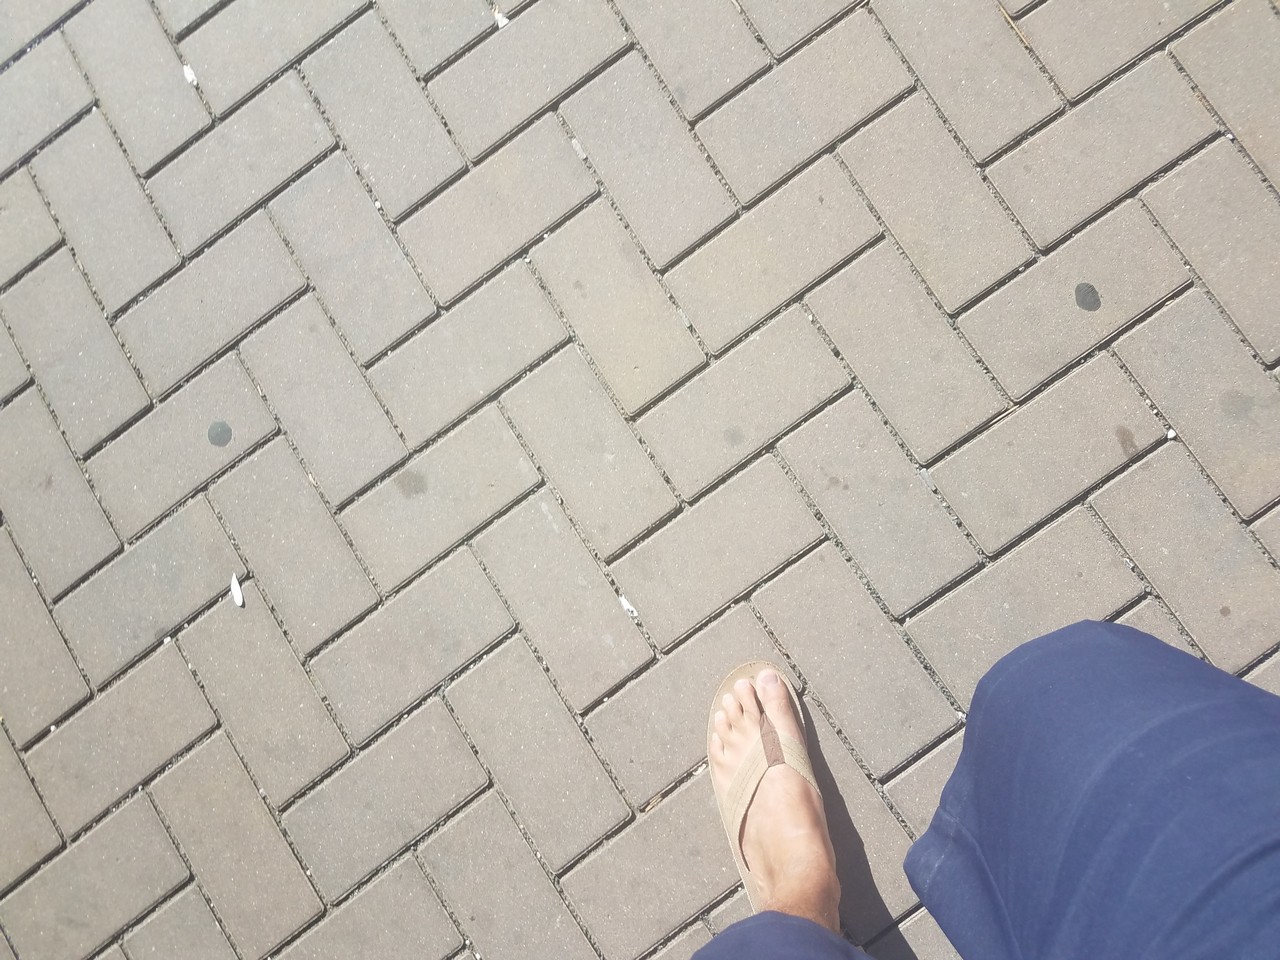 a person's feet on a brick surface